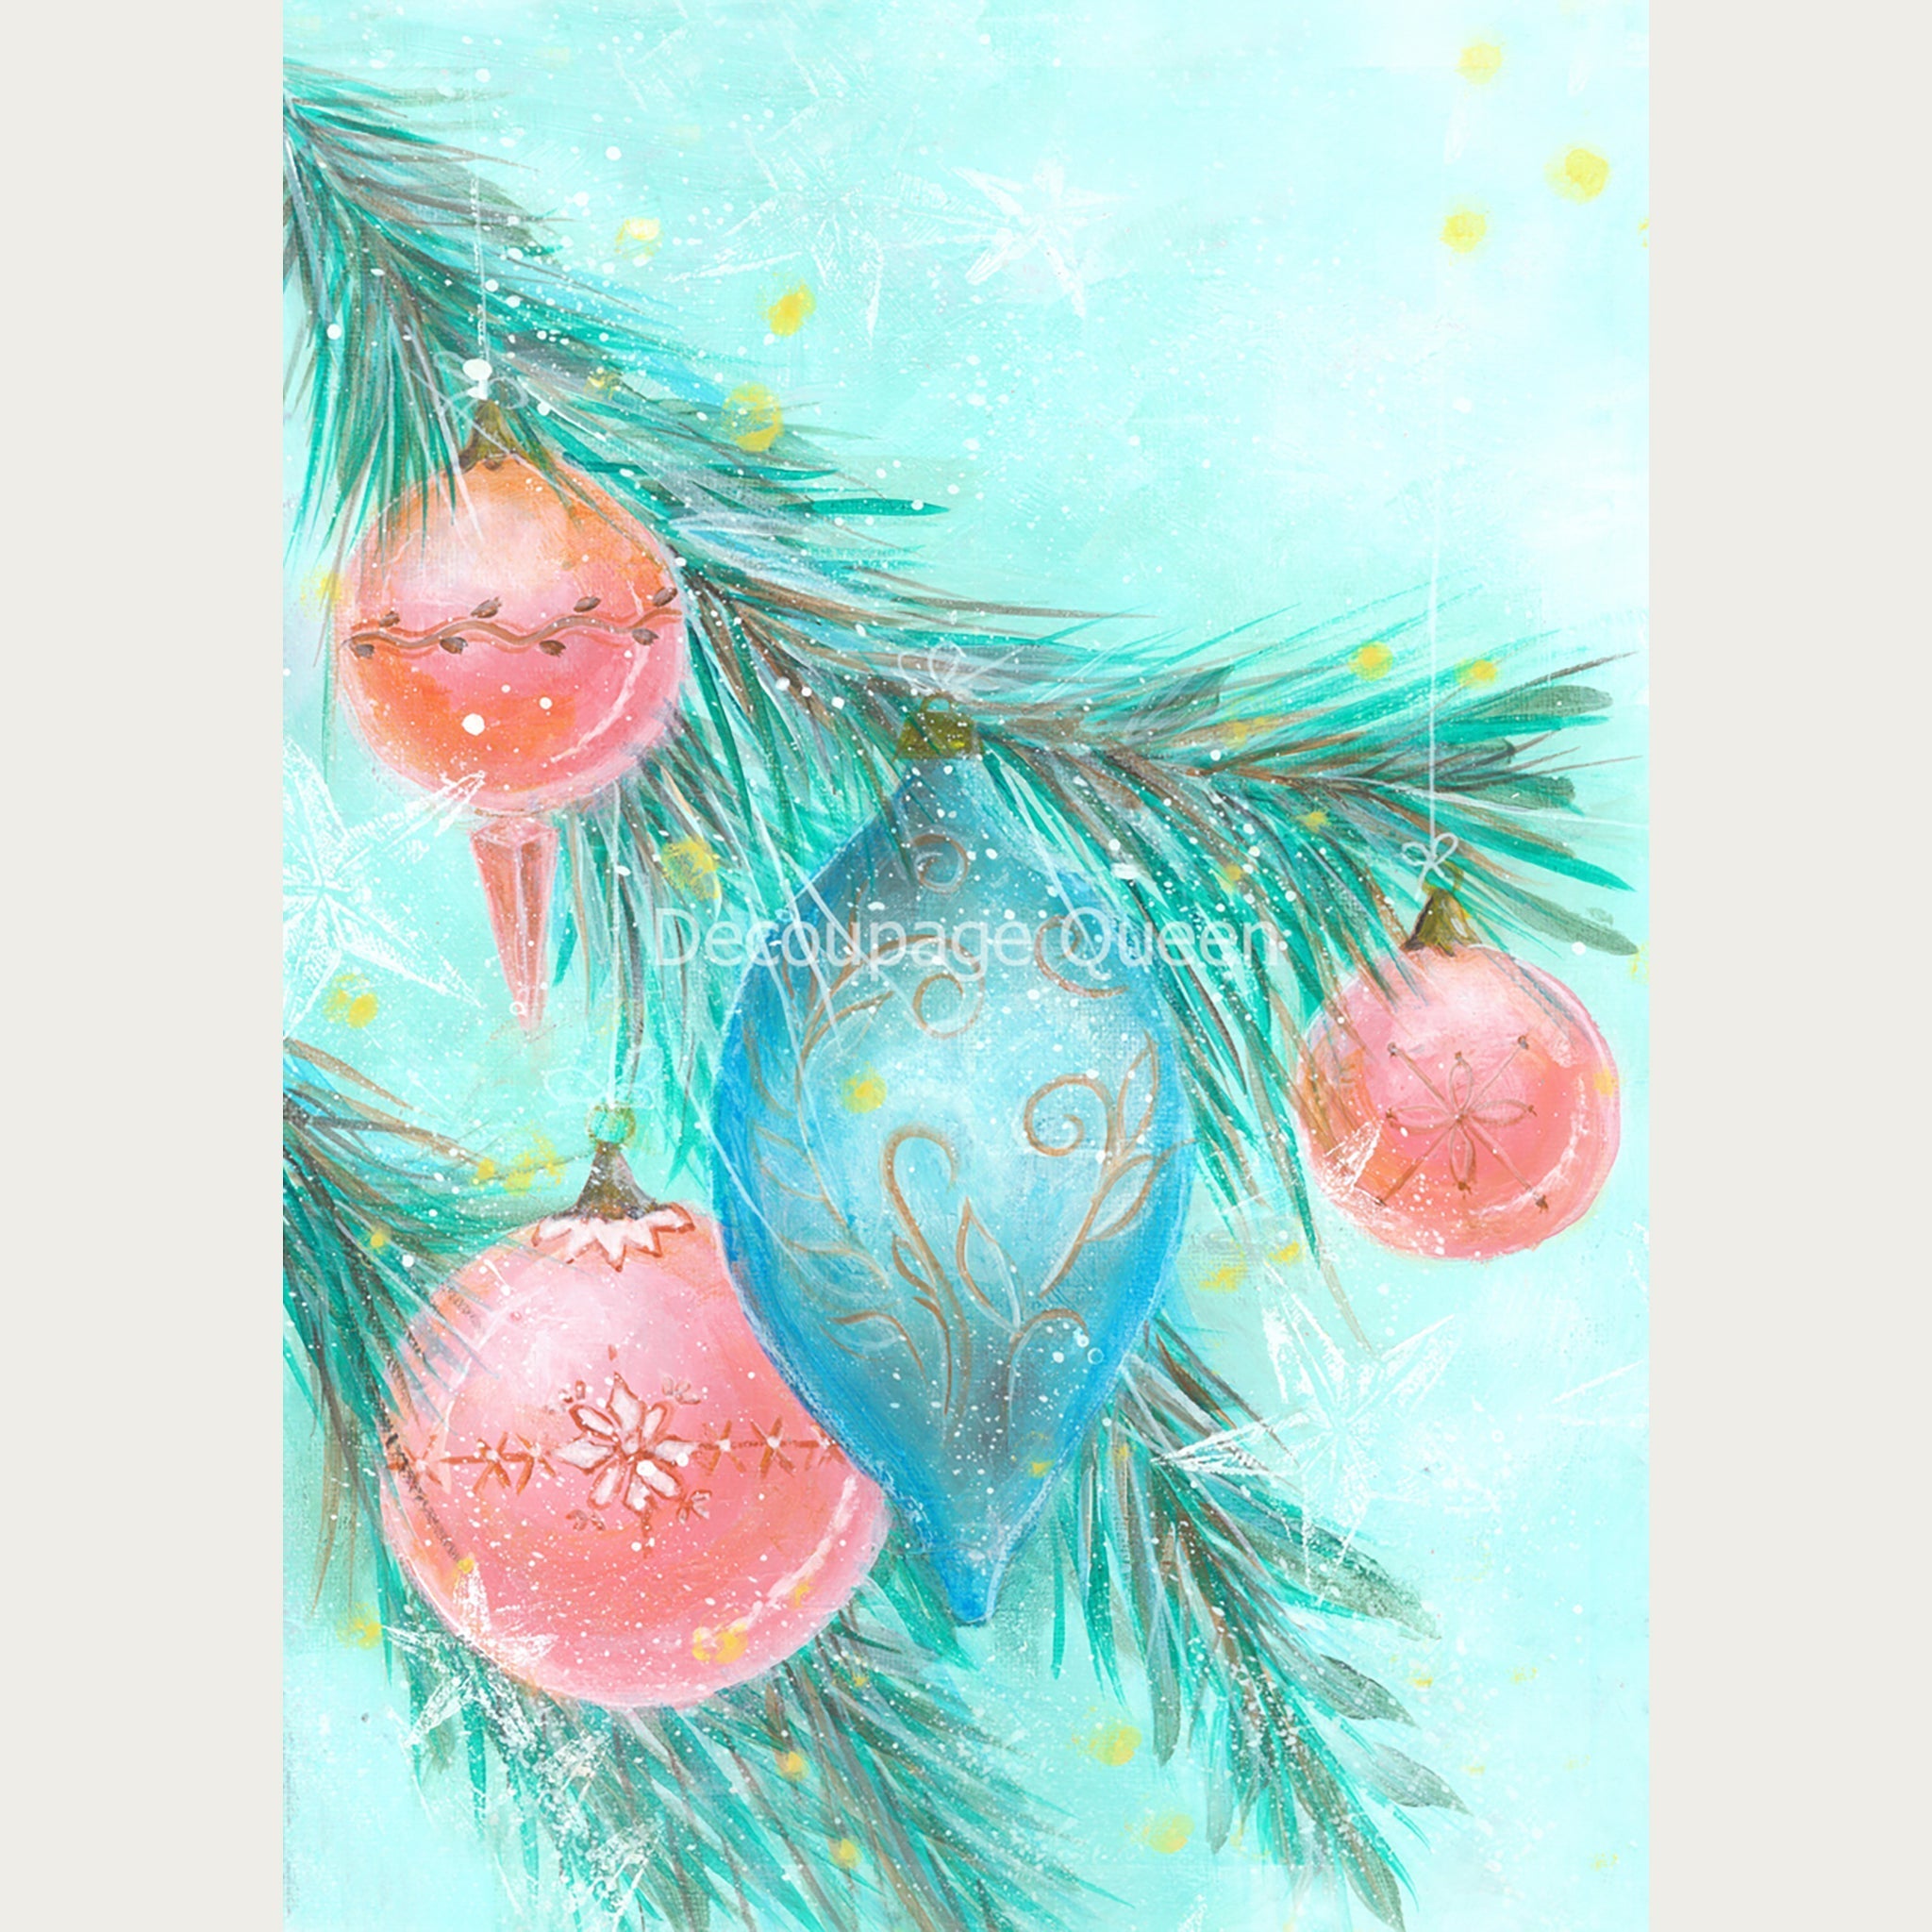 Hand painted style A1 rice paper design of pink and blue ornaments on a pine tree on a soft teal background. White borders are on the sides.